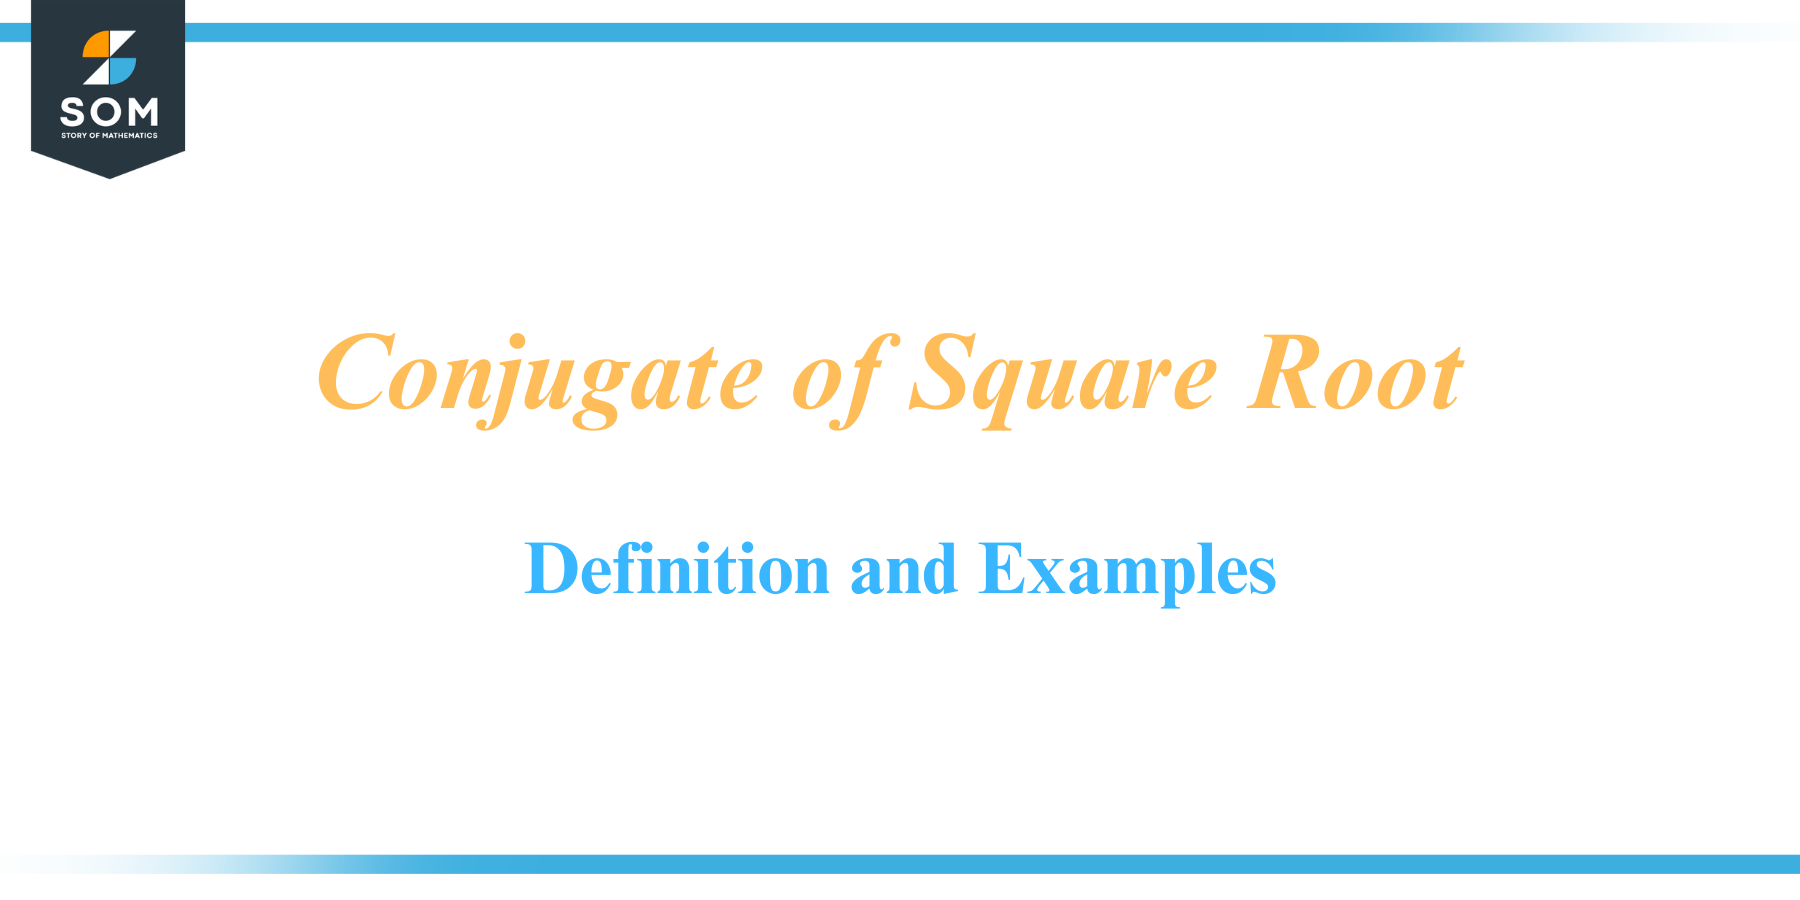 Conjugate of Square Root Definition and